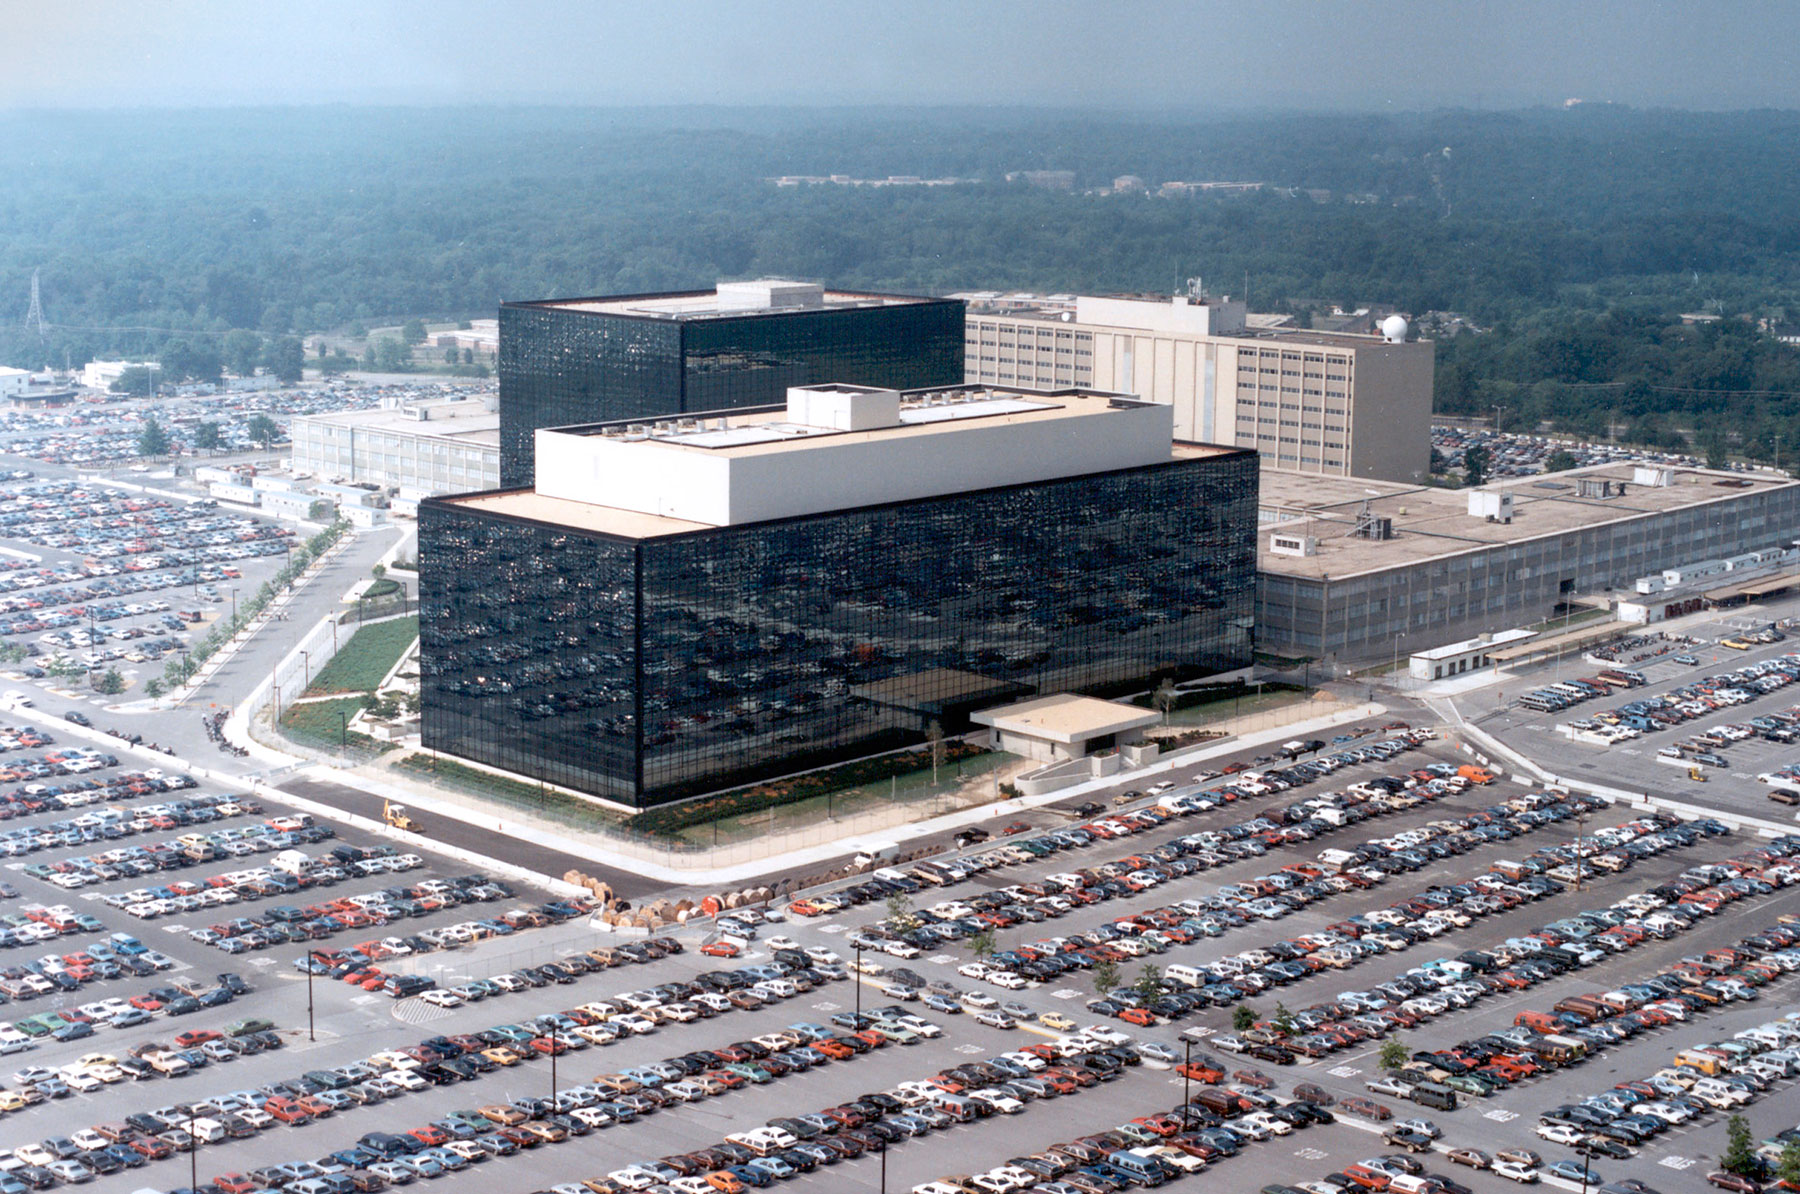 The National Security Agency headquarters building in Fort Meade, Maryland.